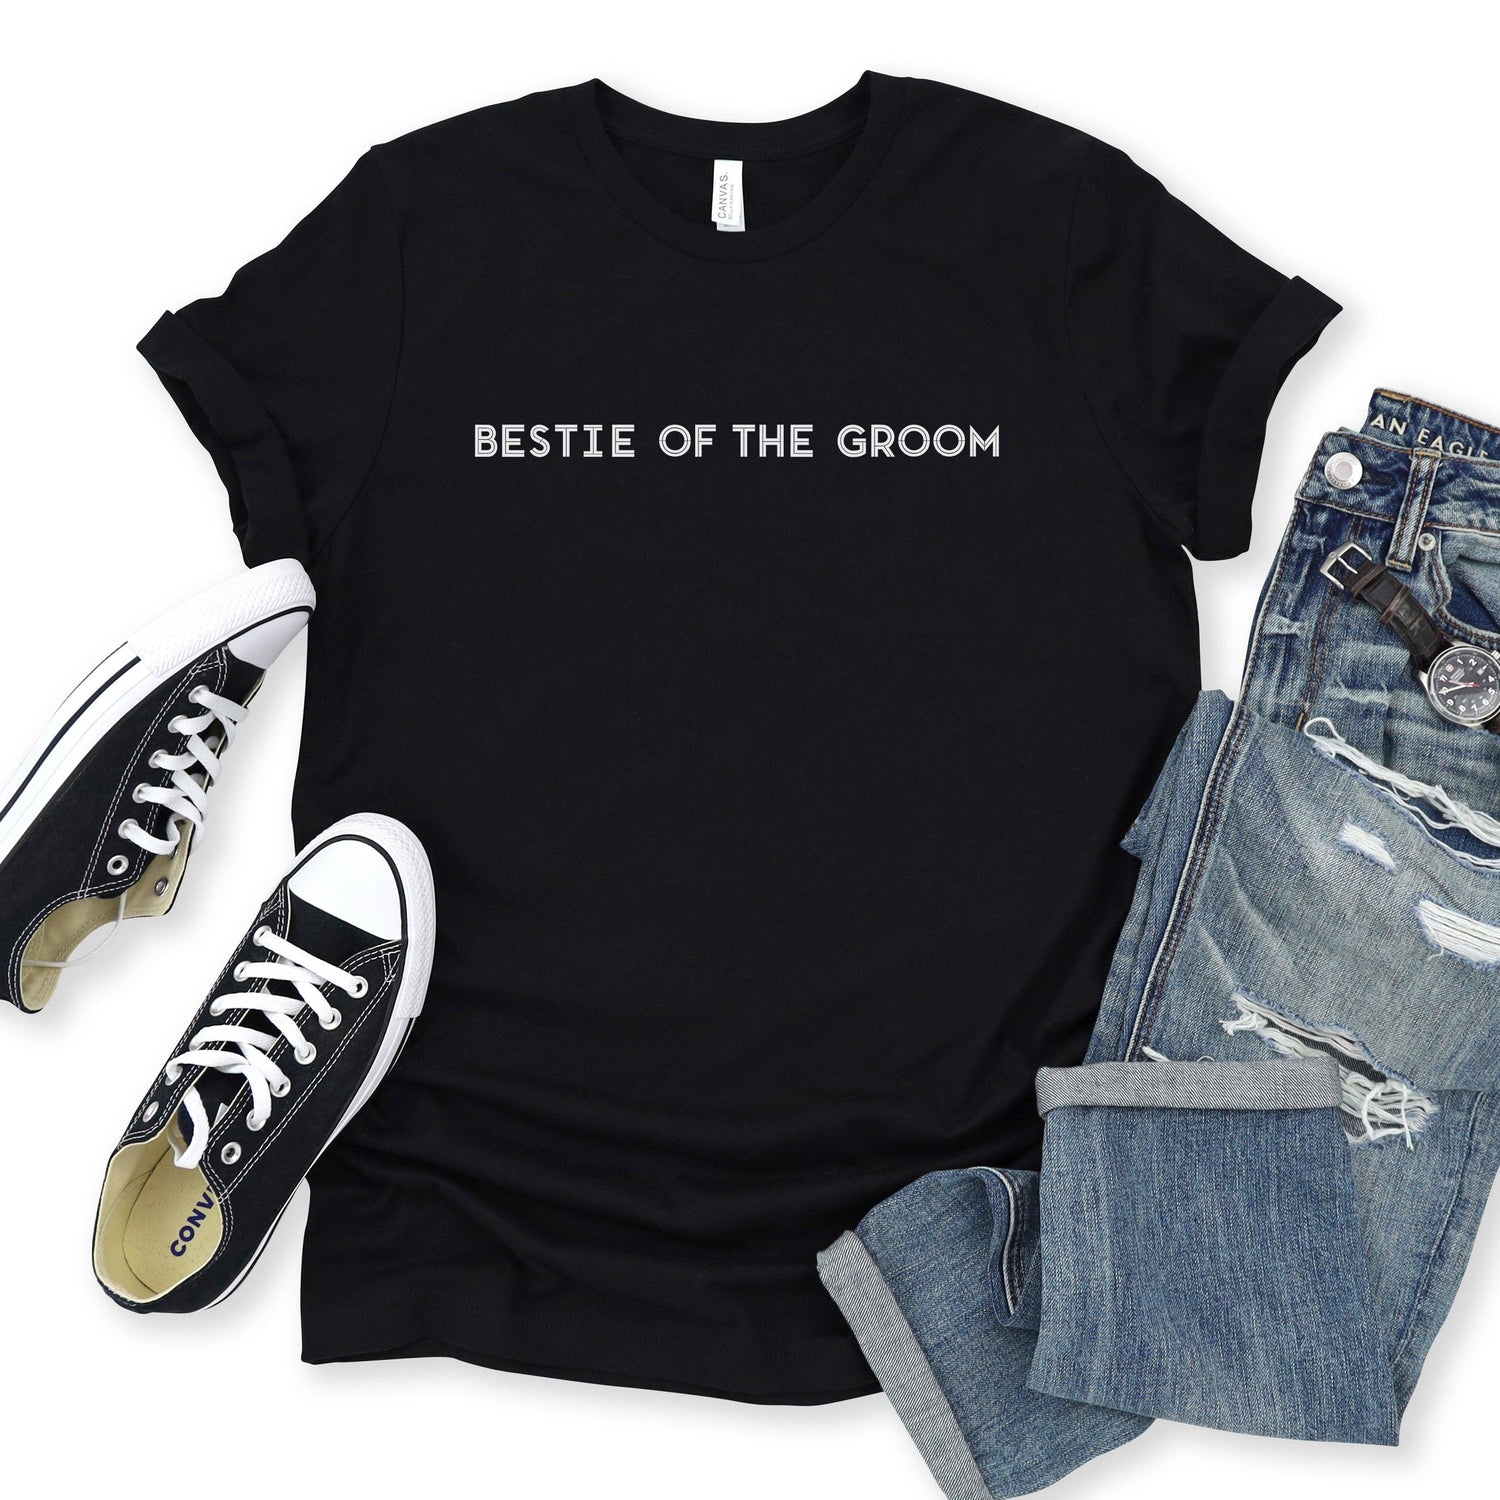 Bestie of the Groom - Unisex t-shirt - Wedding Party Matching Shirts - Bachelor Party by Oaklynn Lane - Black gender neutral shirt